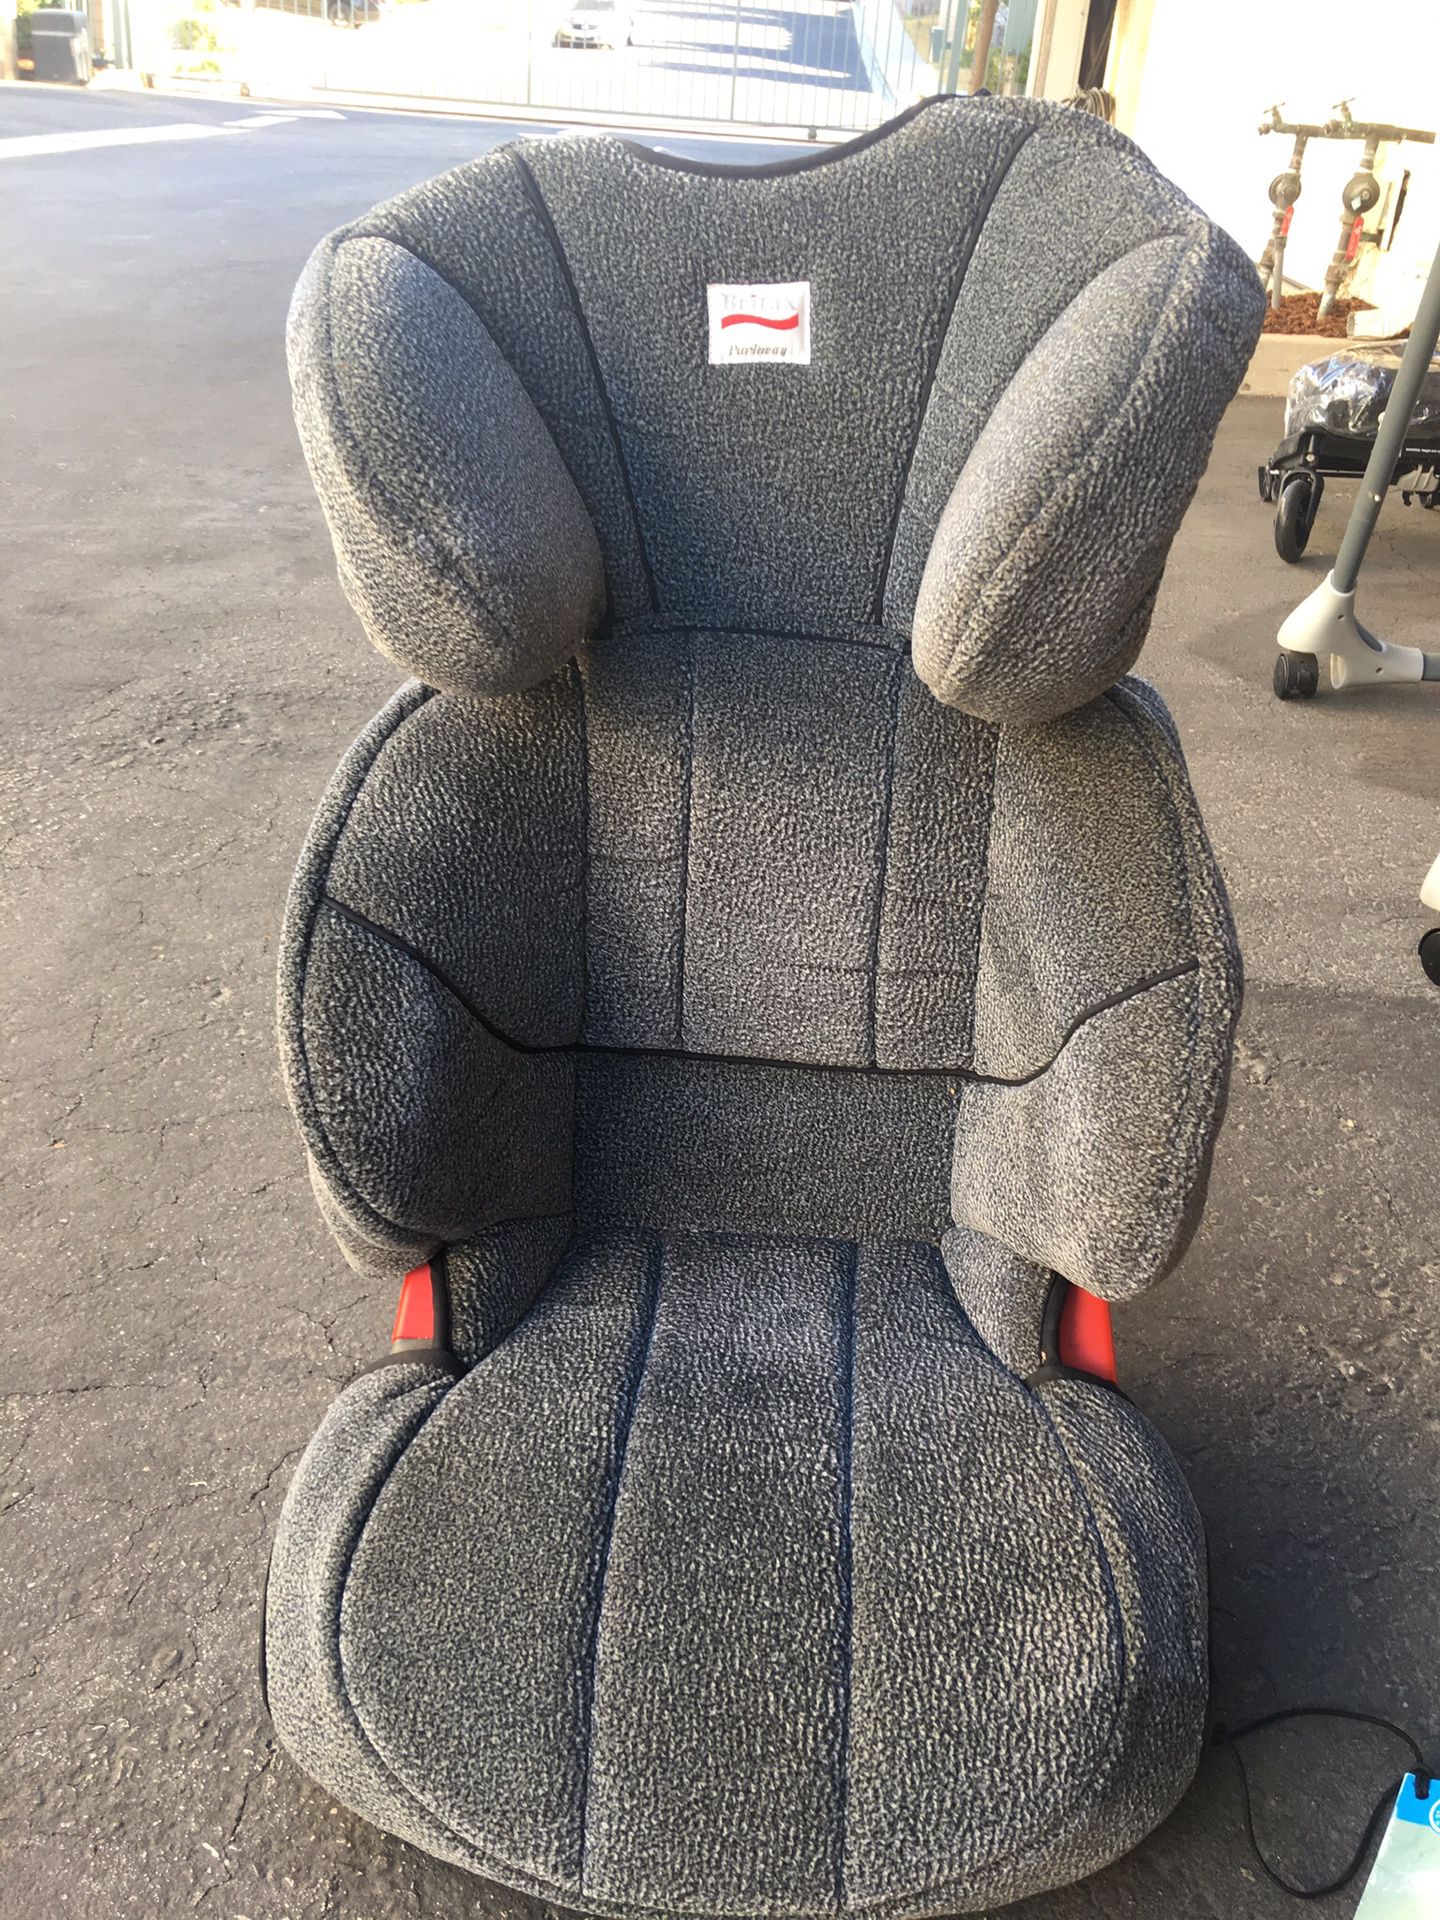 Britax Parkway Childs Booster w/ Adjustable Back - Good Condition